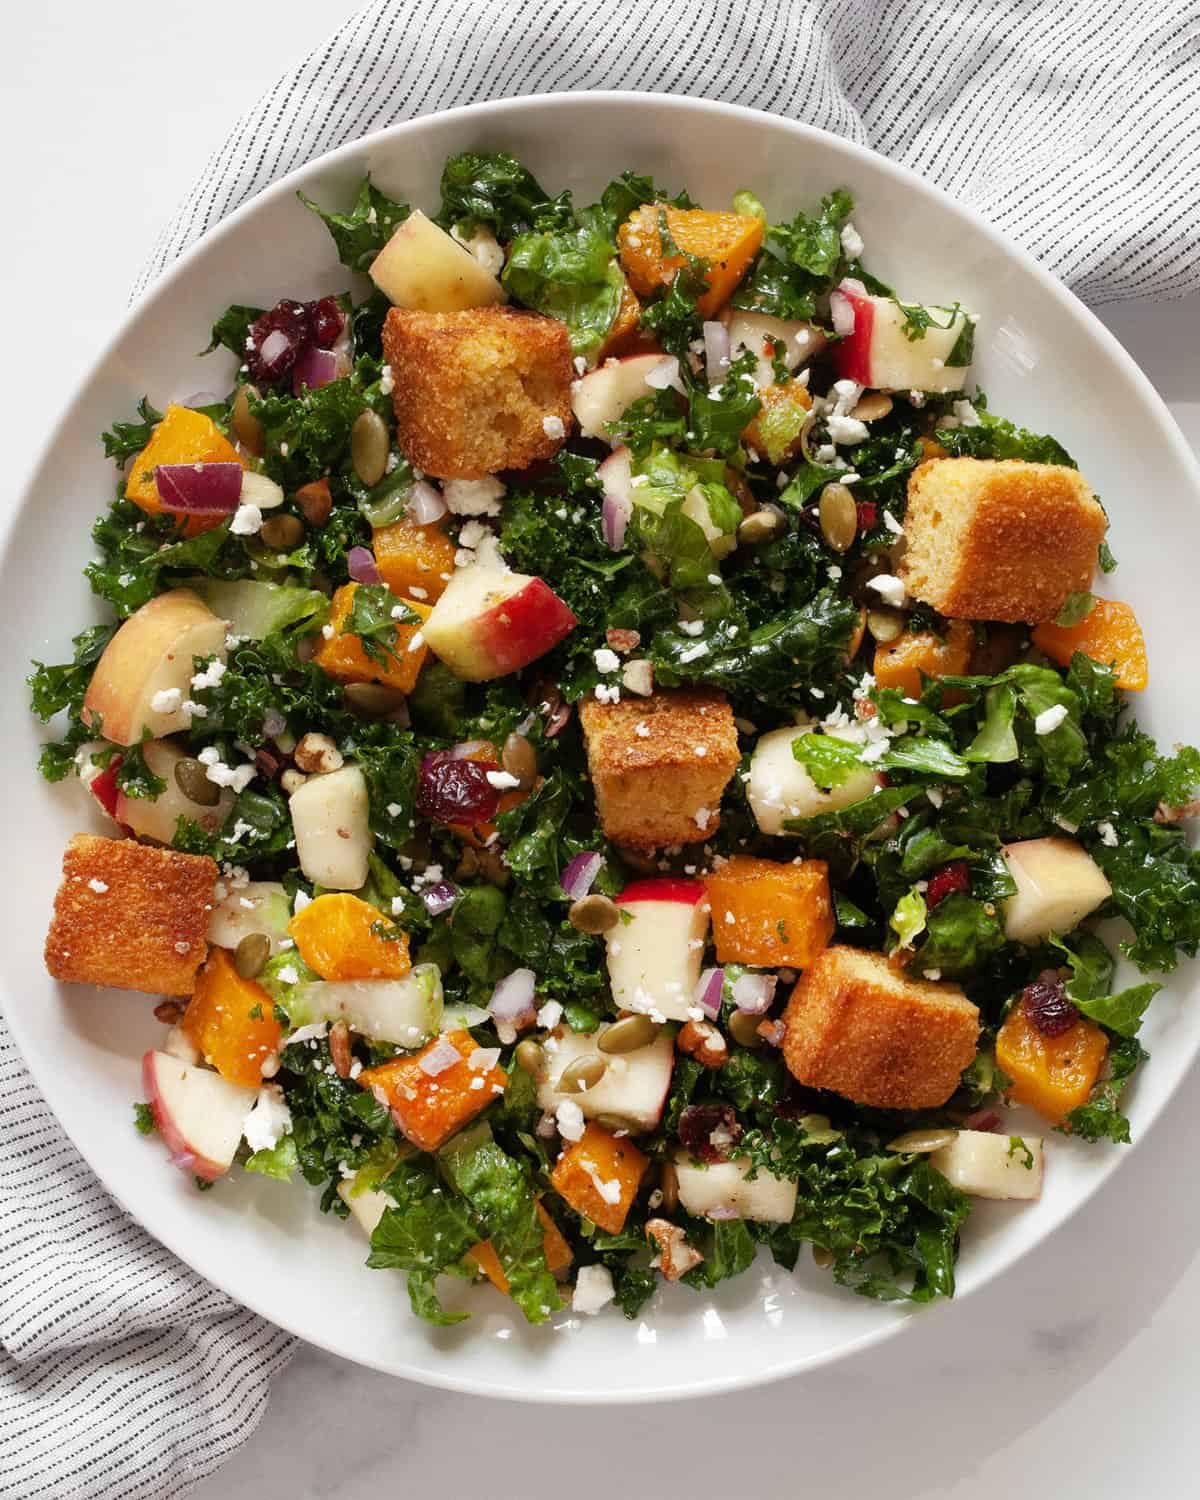 Fall harvest salad with roasted butternut and apples on a plate.